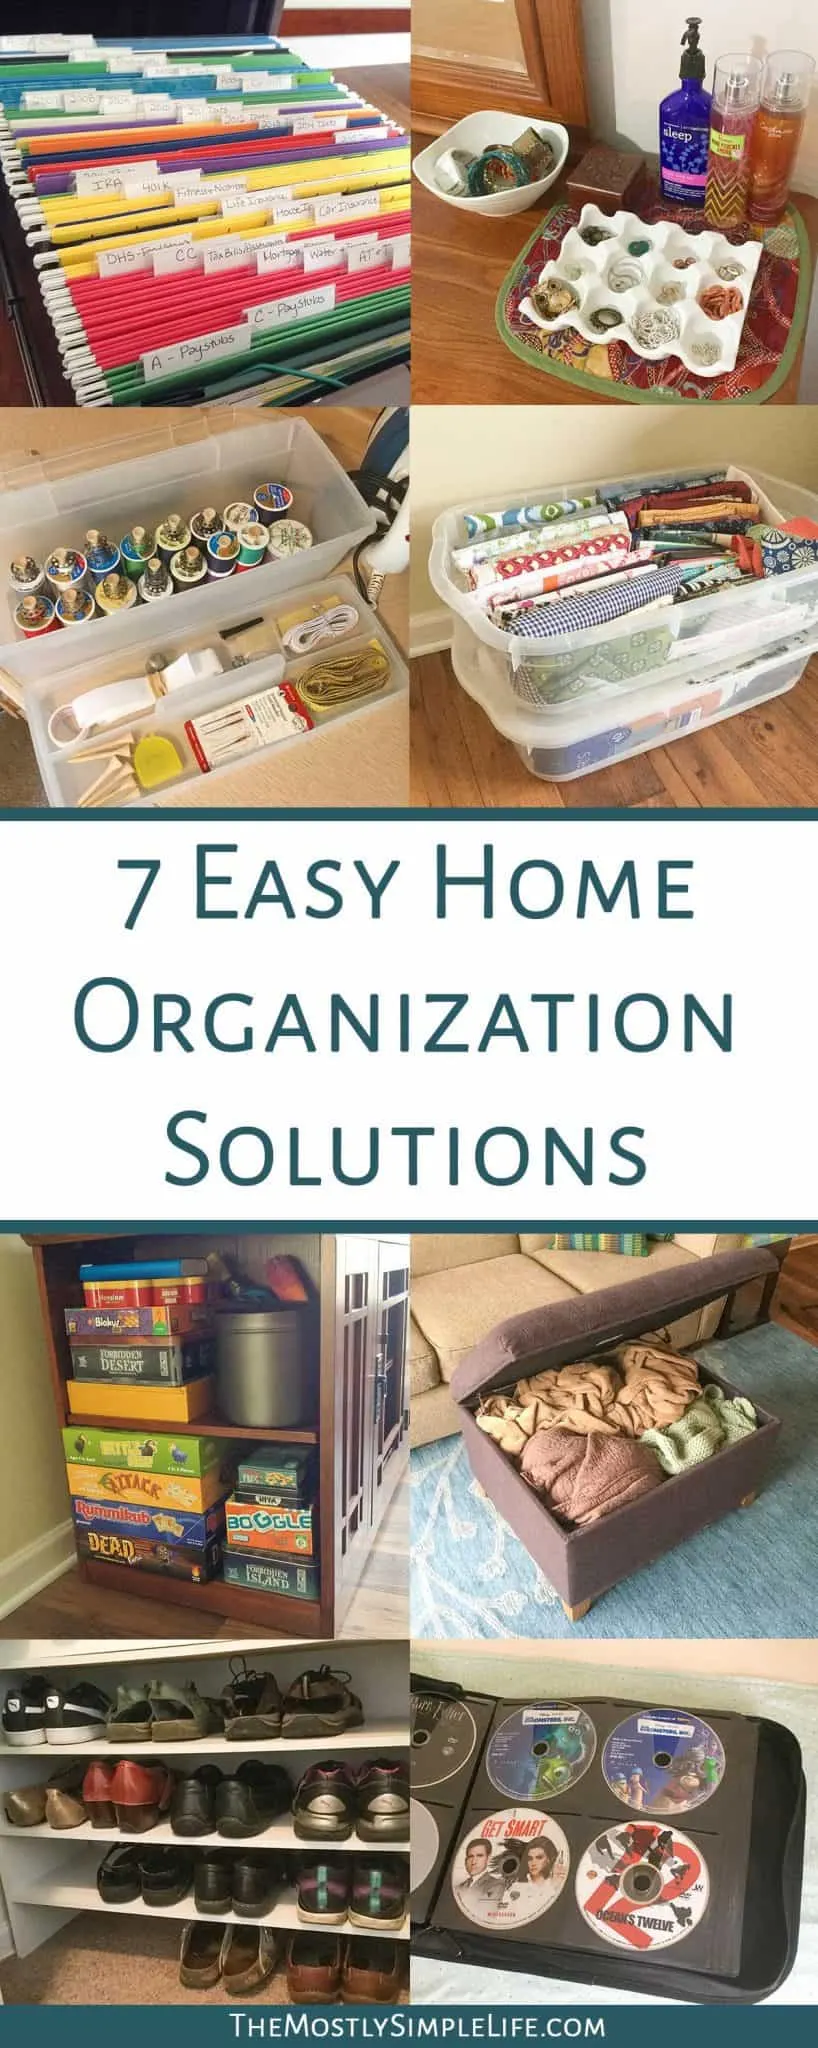 7 Home Organization Solutions